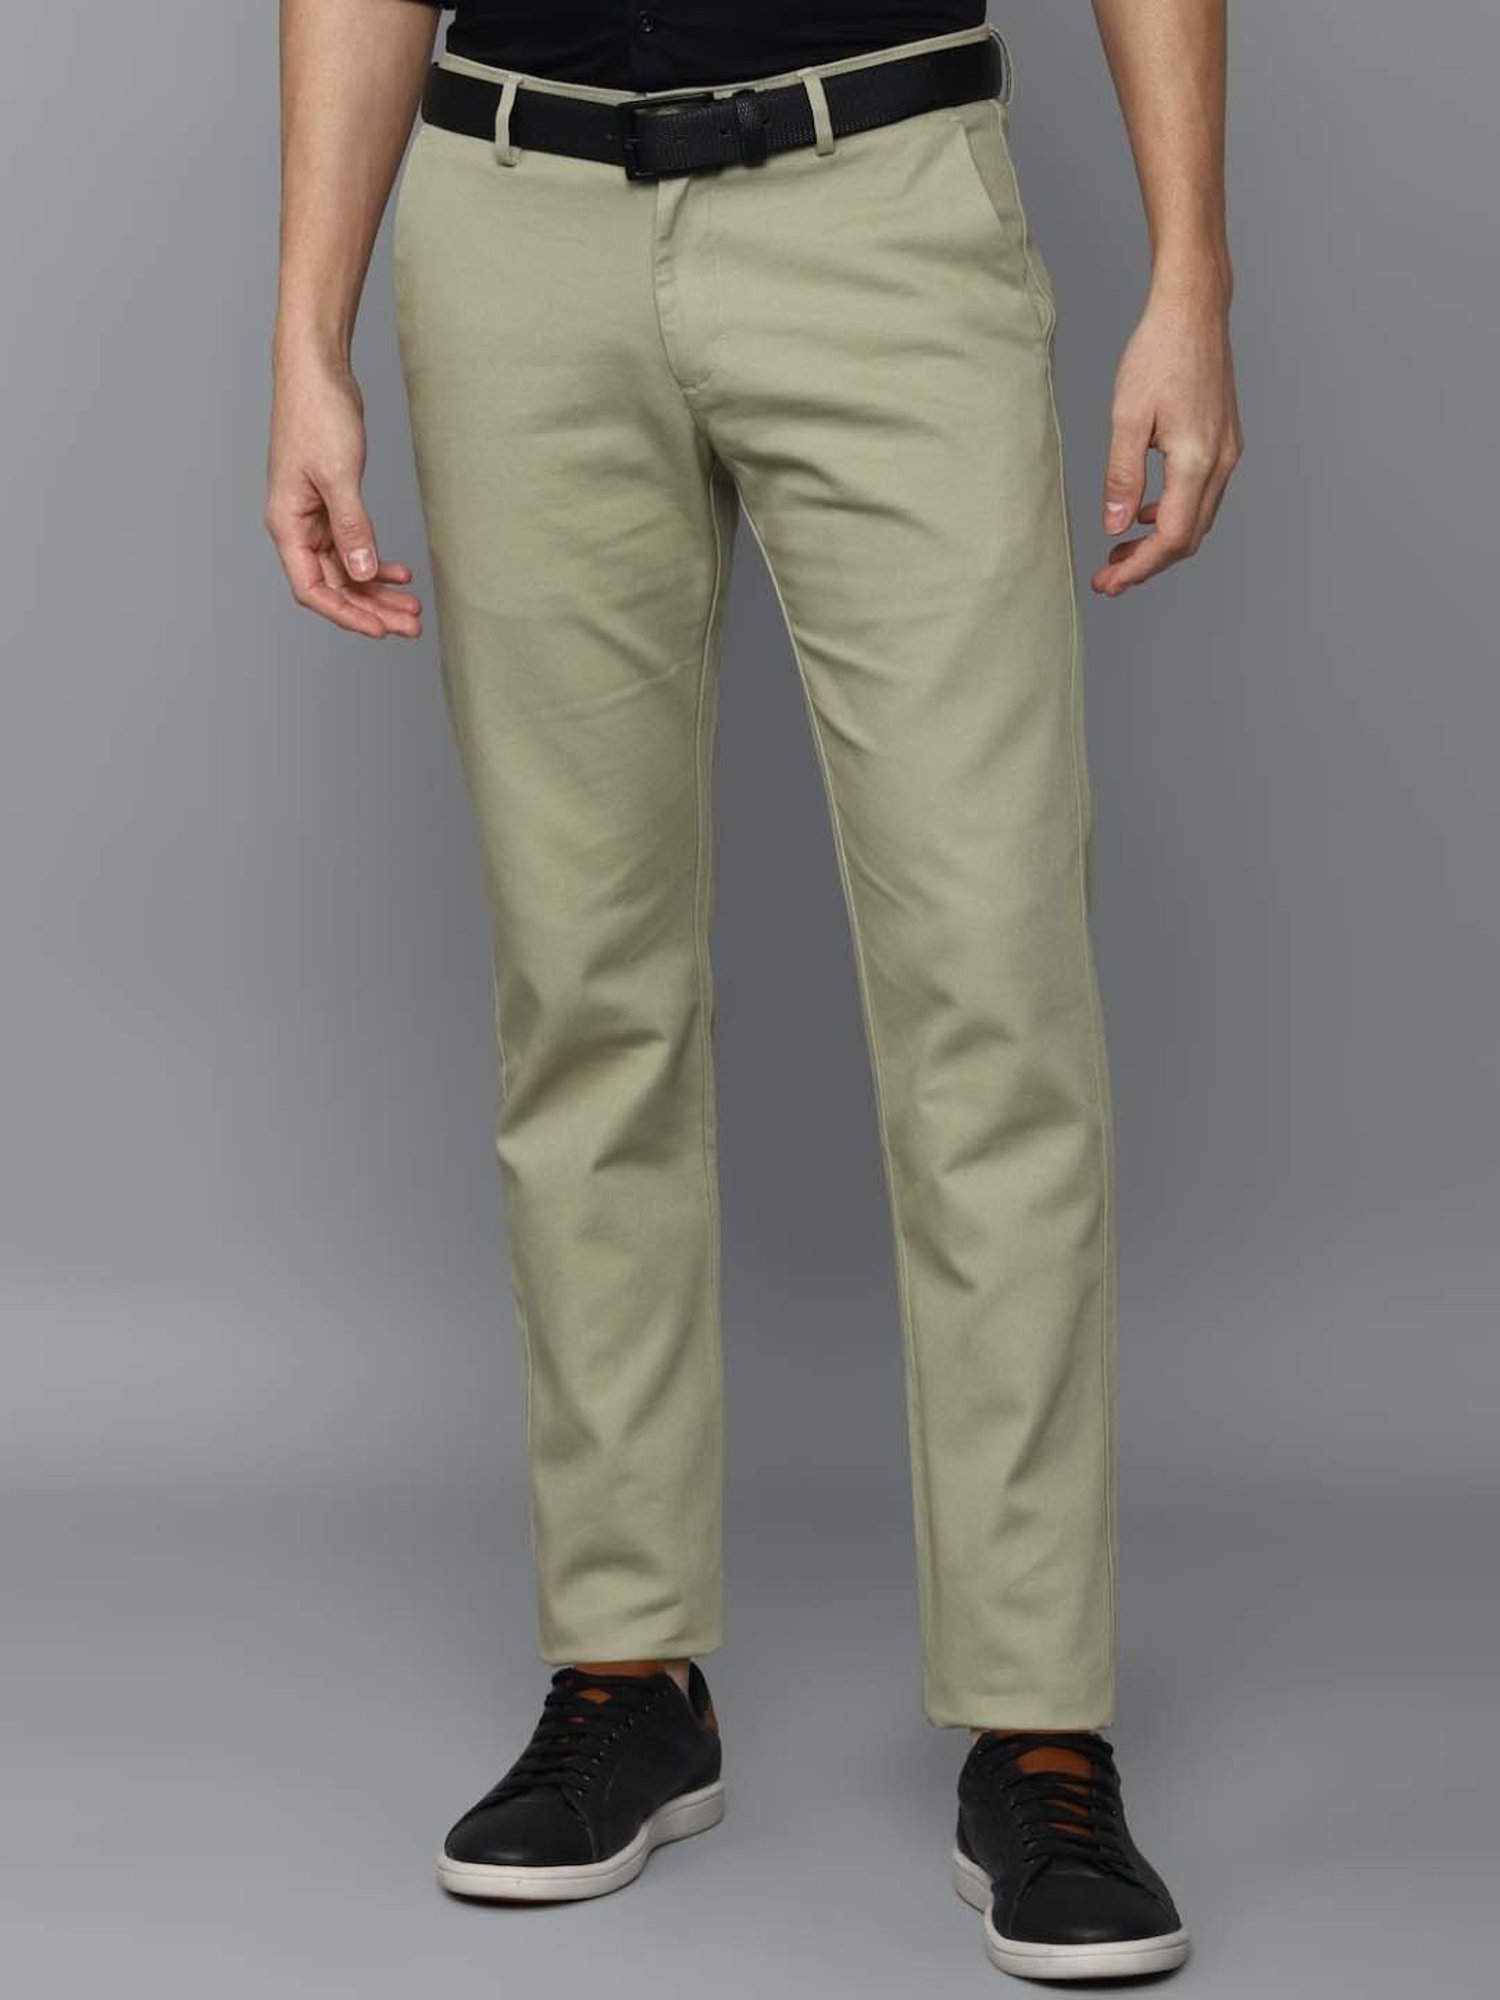 Find Allen solly trouser by PS COLLECTION near me  Udhna Surat Gujarat   Anar B2B Business App